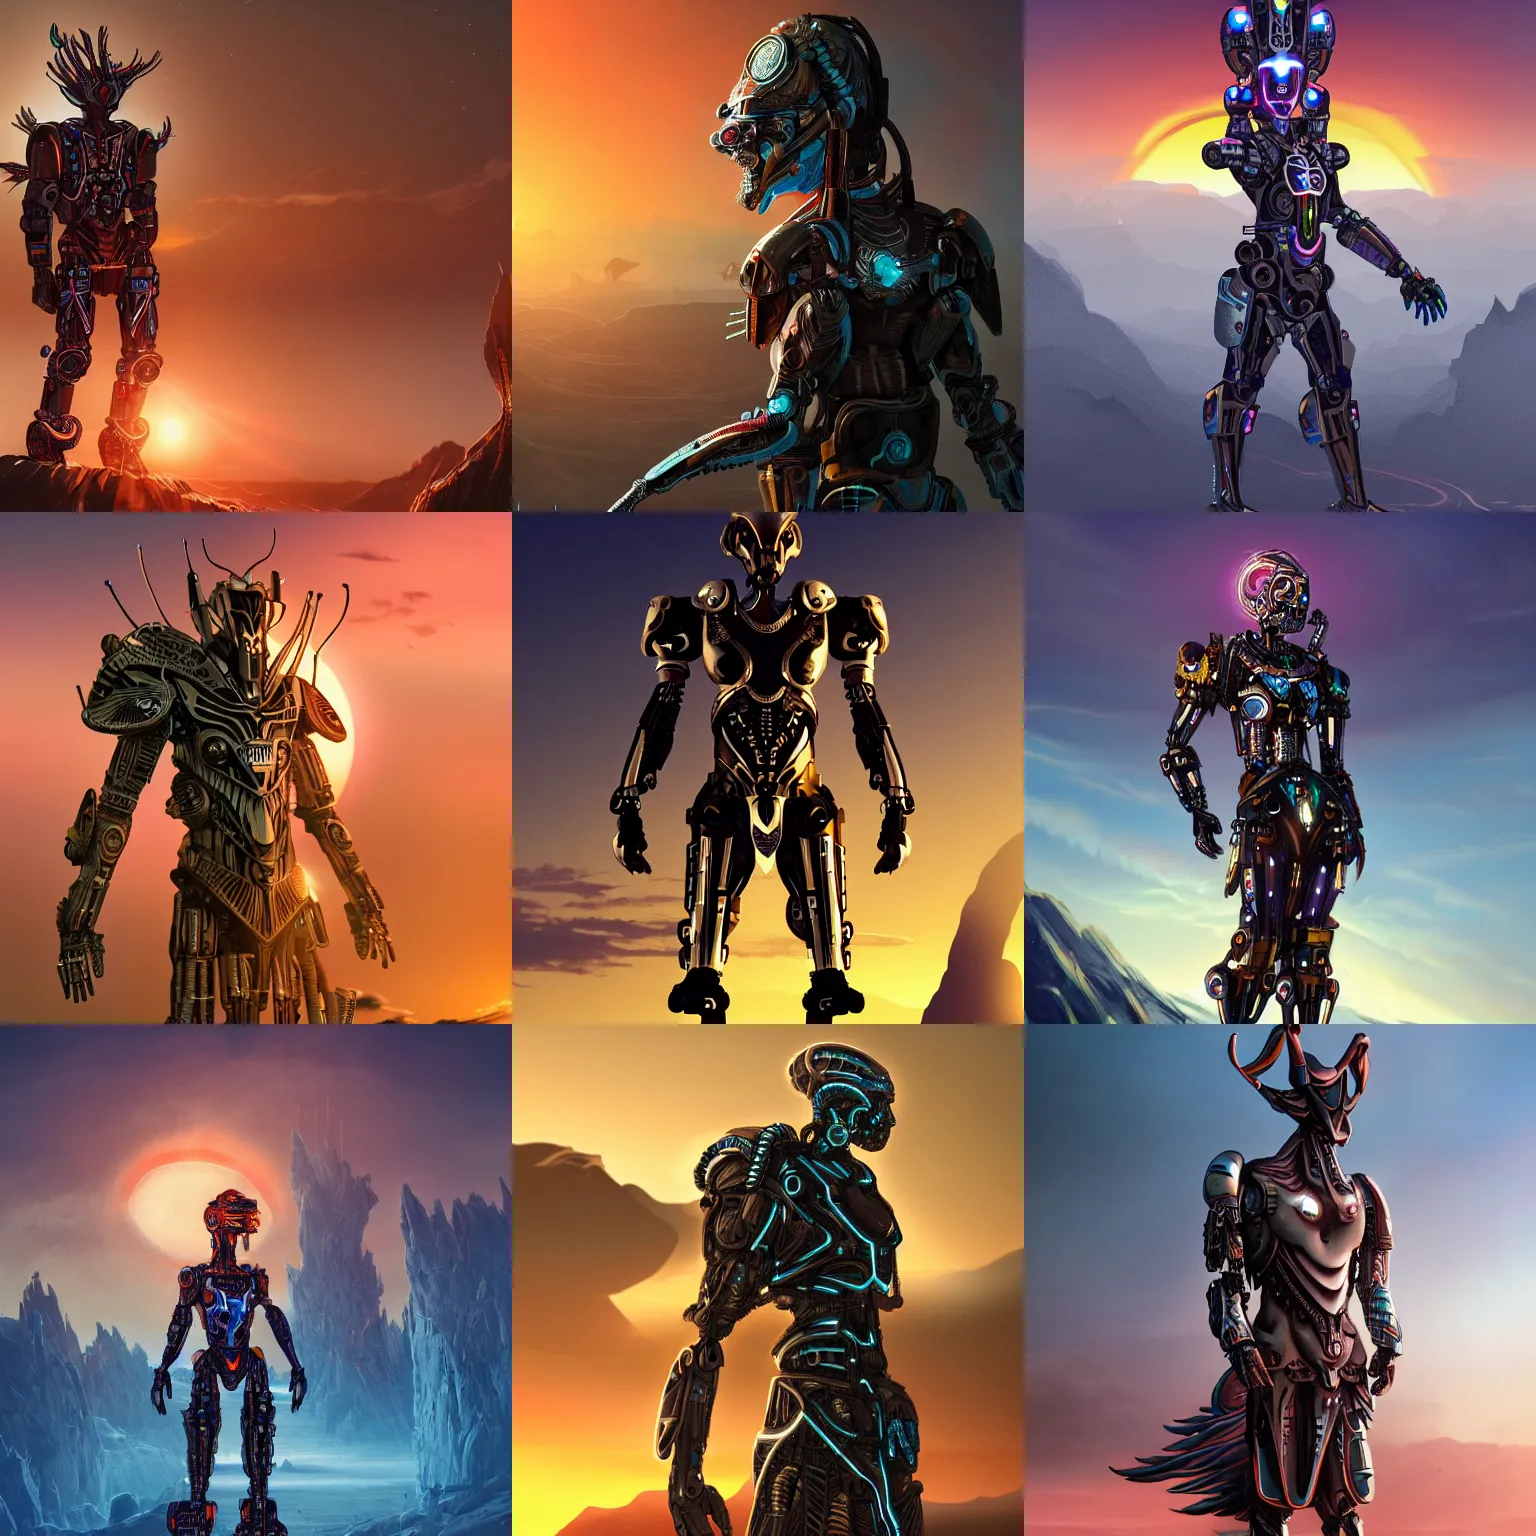 Prompt: a highly evolved cyborg humanoid with armor wearing a futuristic tribal headdress and long flowing robes, standing in an alien landscape with a distant sci-fi city and a beautiful sunset, featured on artstation